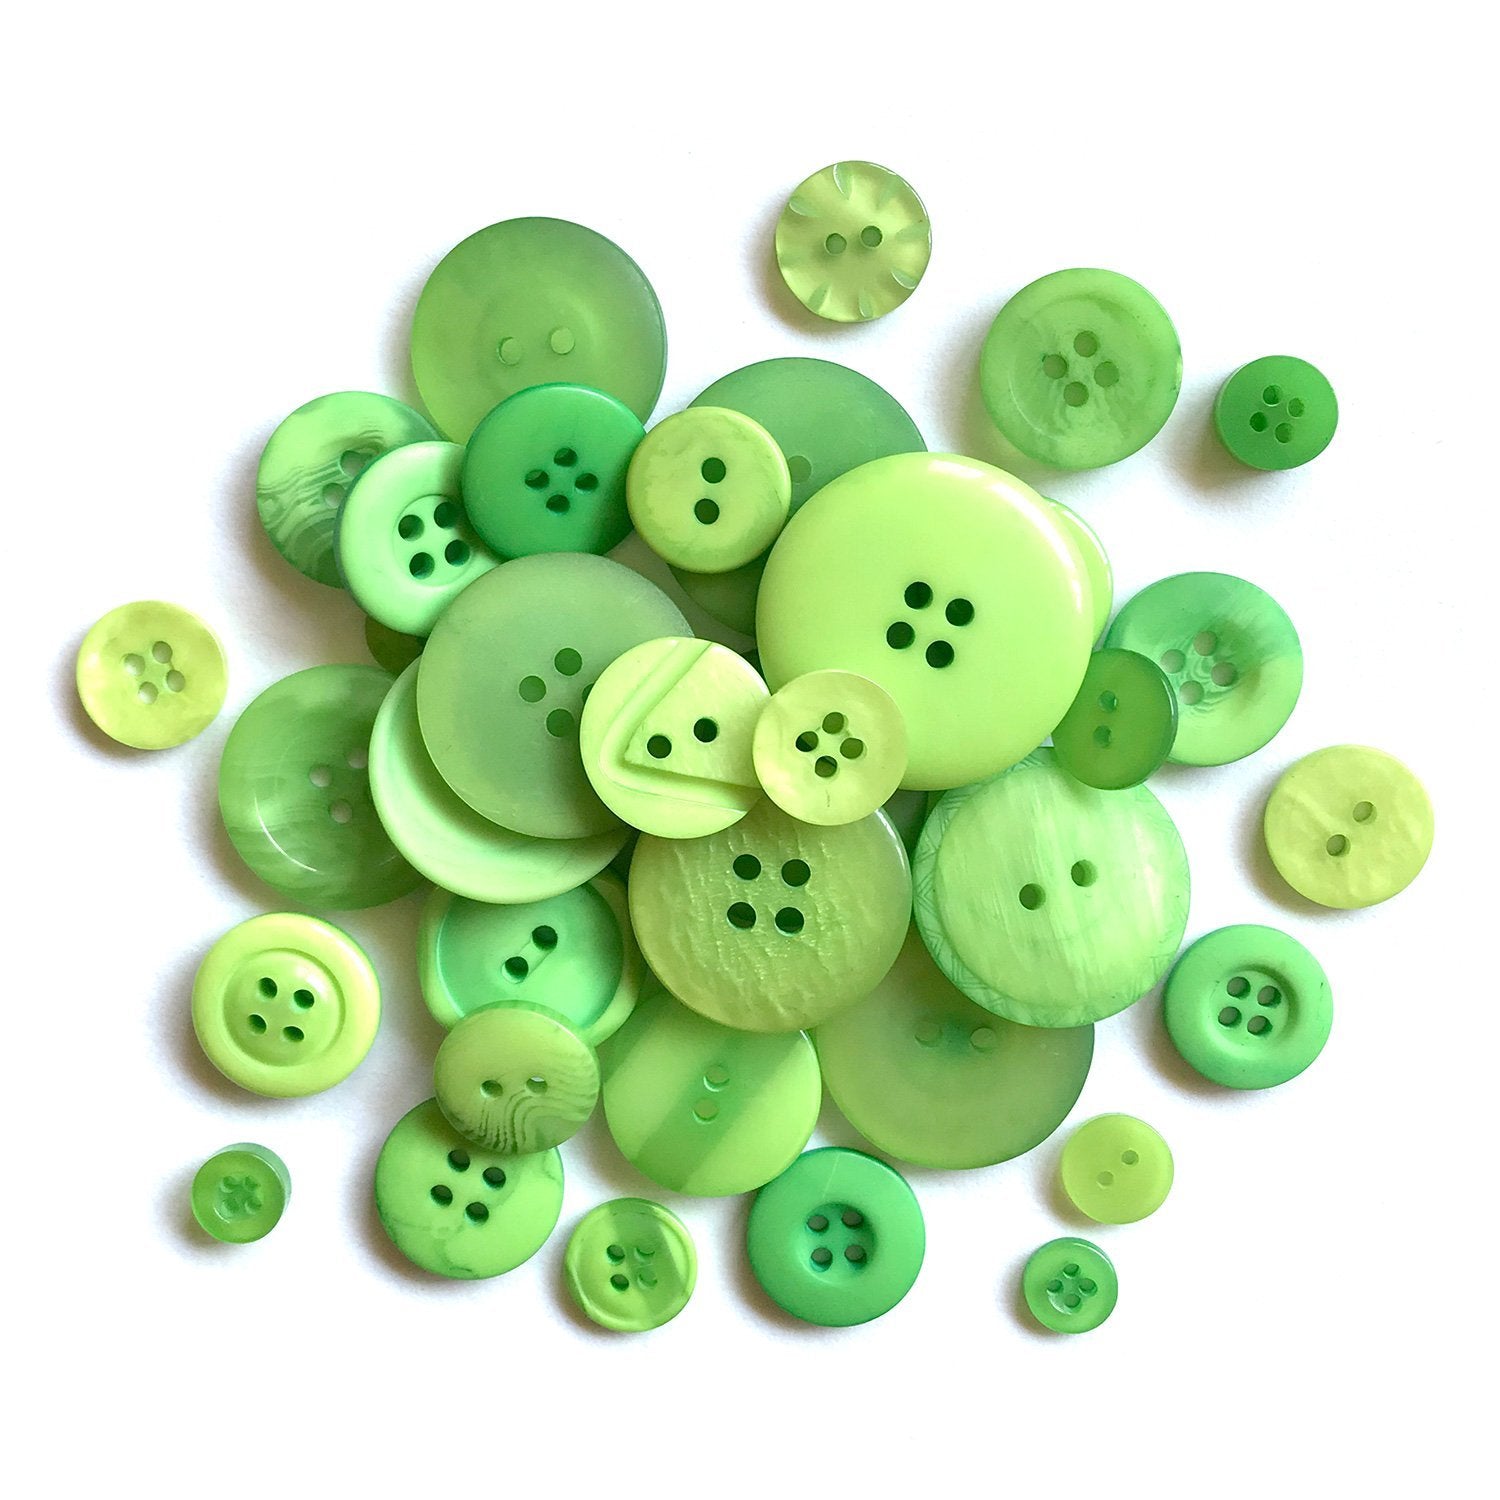 Buttons Galore Bright Color Grab Bag with Craft and Sewing Buttons 6-Ounce